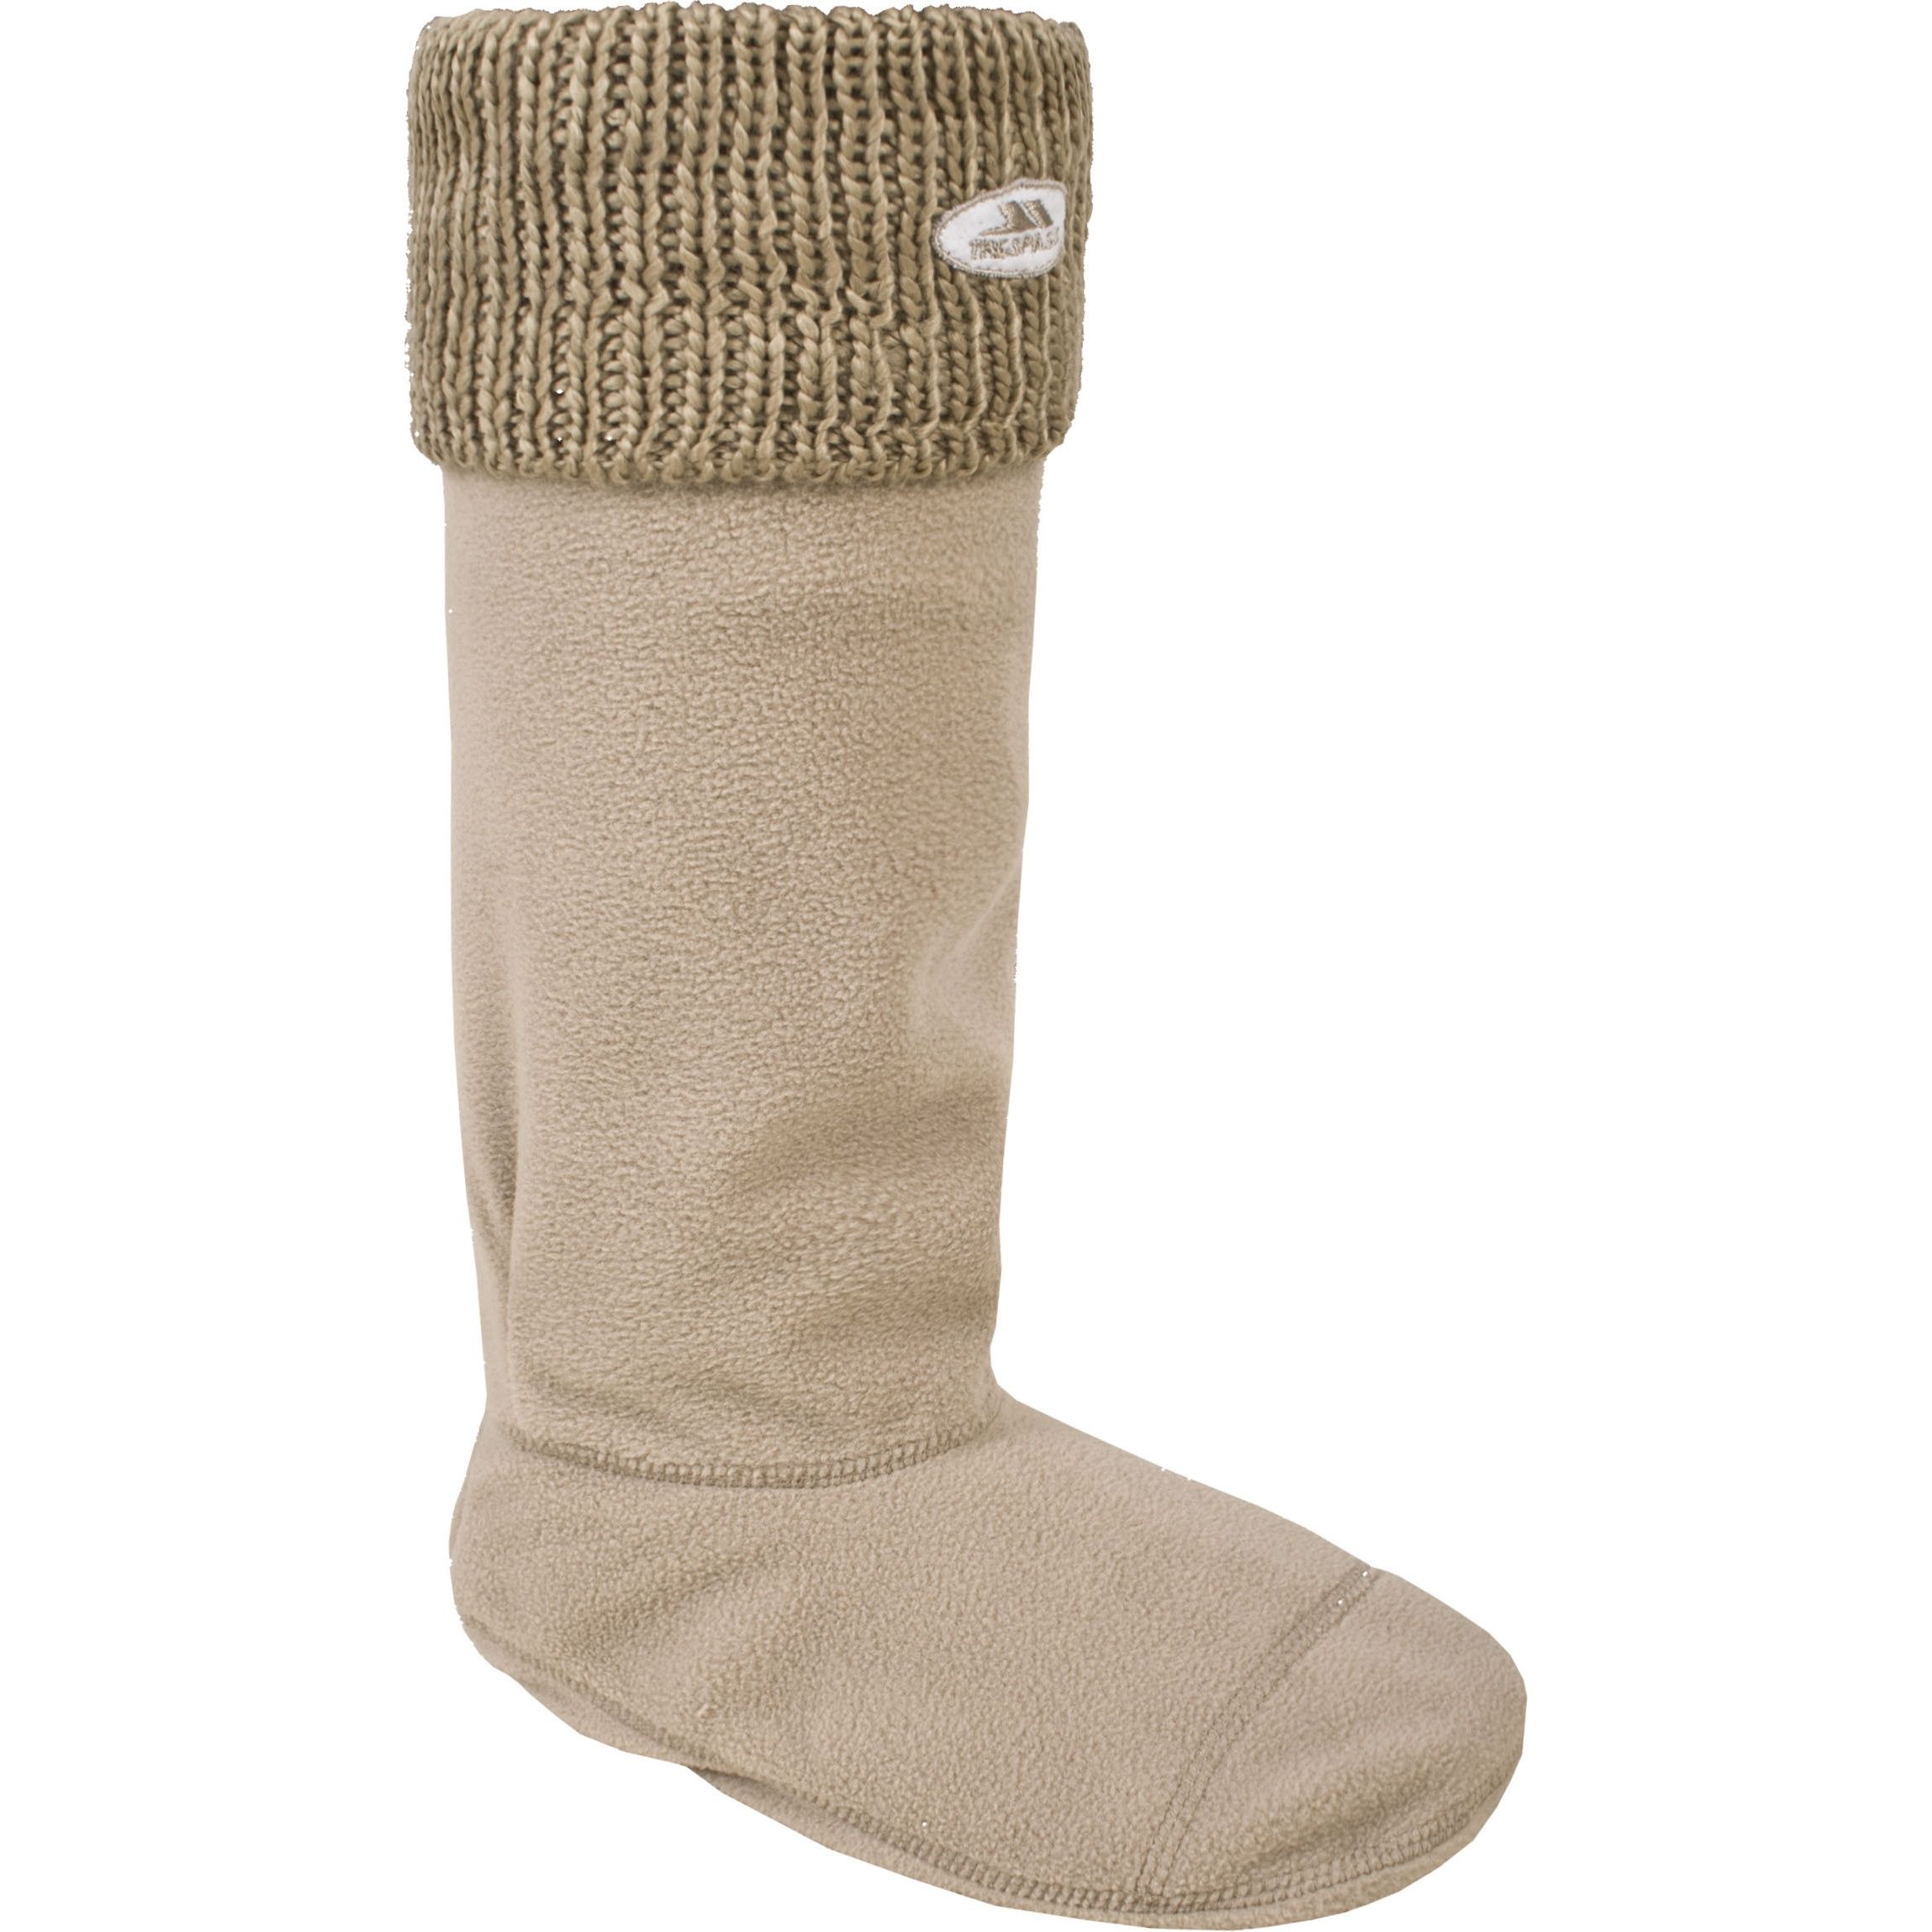 Welly sock. Embroidered Trespass logo. Knitted cuff. Leg: 100% Polyester, Cuff: 70% Acrylic, 30% Wool.